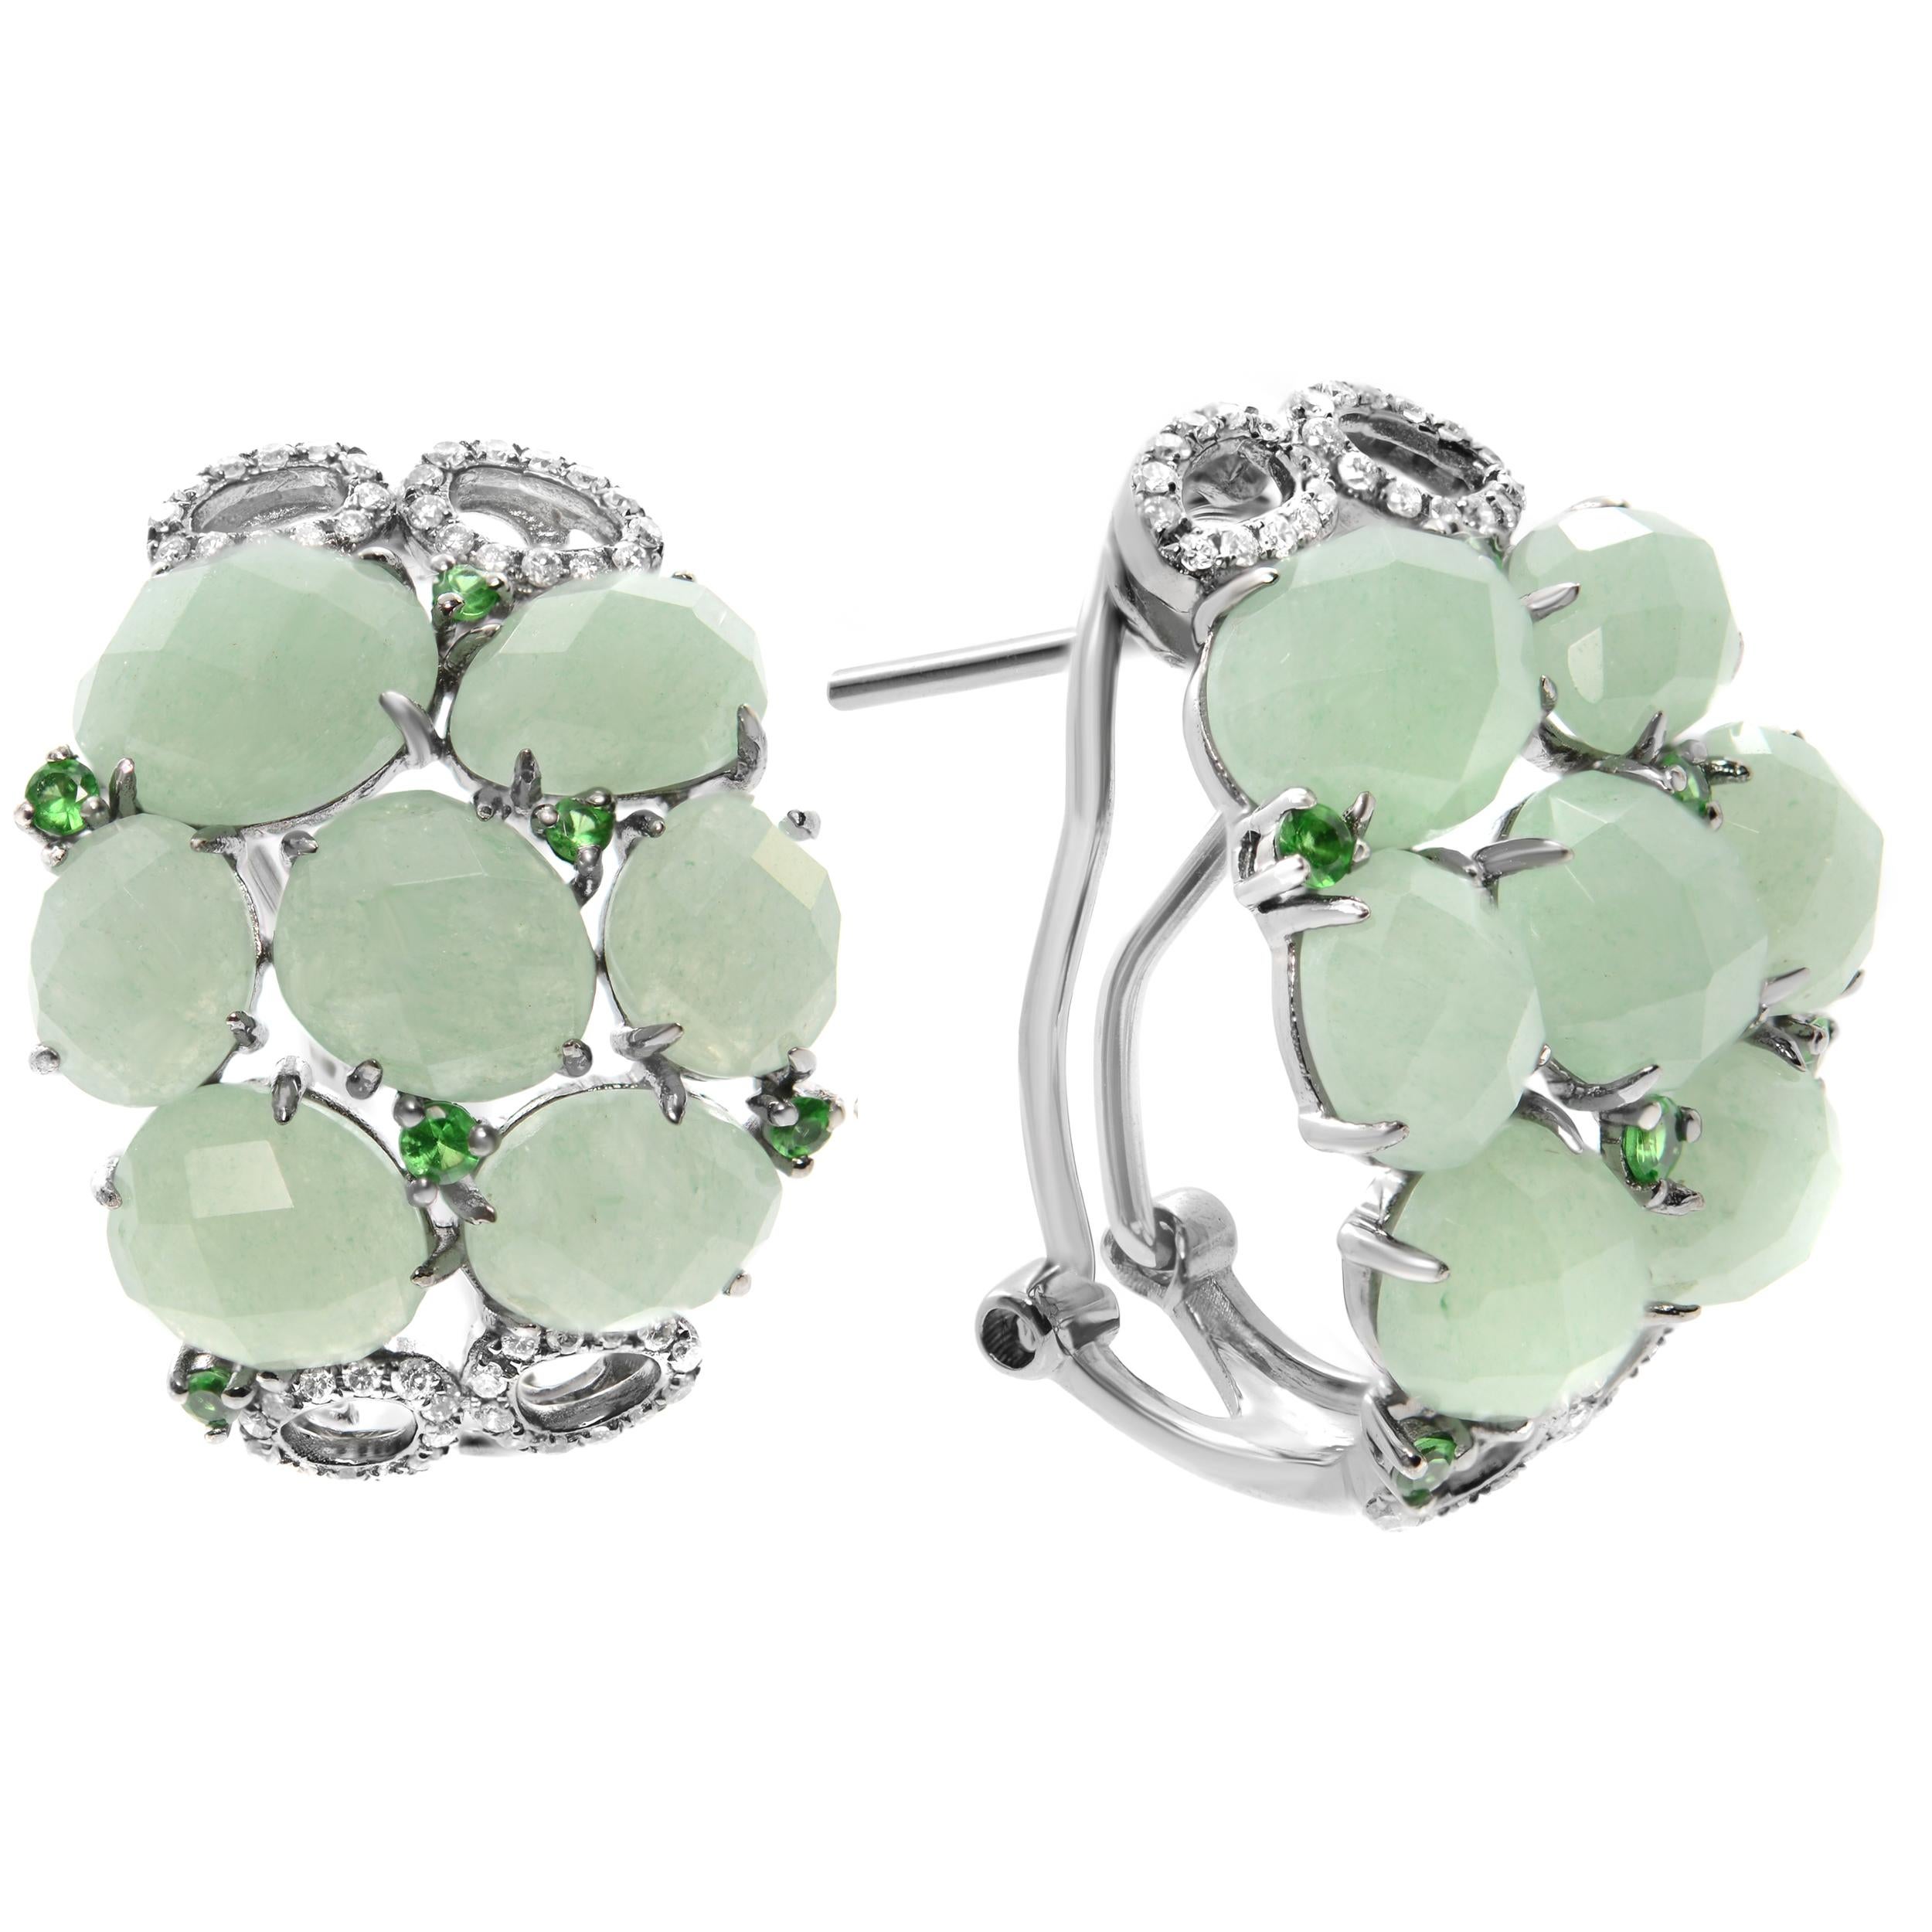 18K white gold black rhodium natural Aventurine & Green Emerald Huggie Earrings. Size:  1 inch long. Comes with a presentable gift box. 
